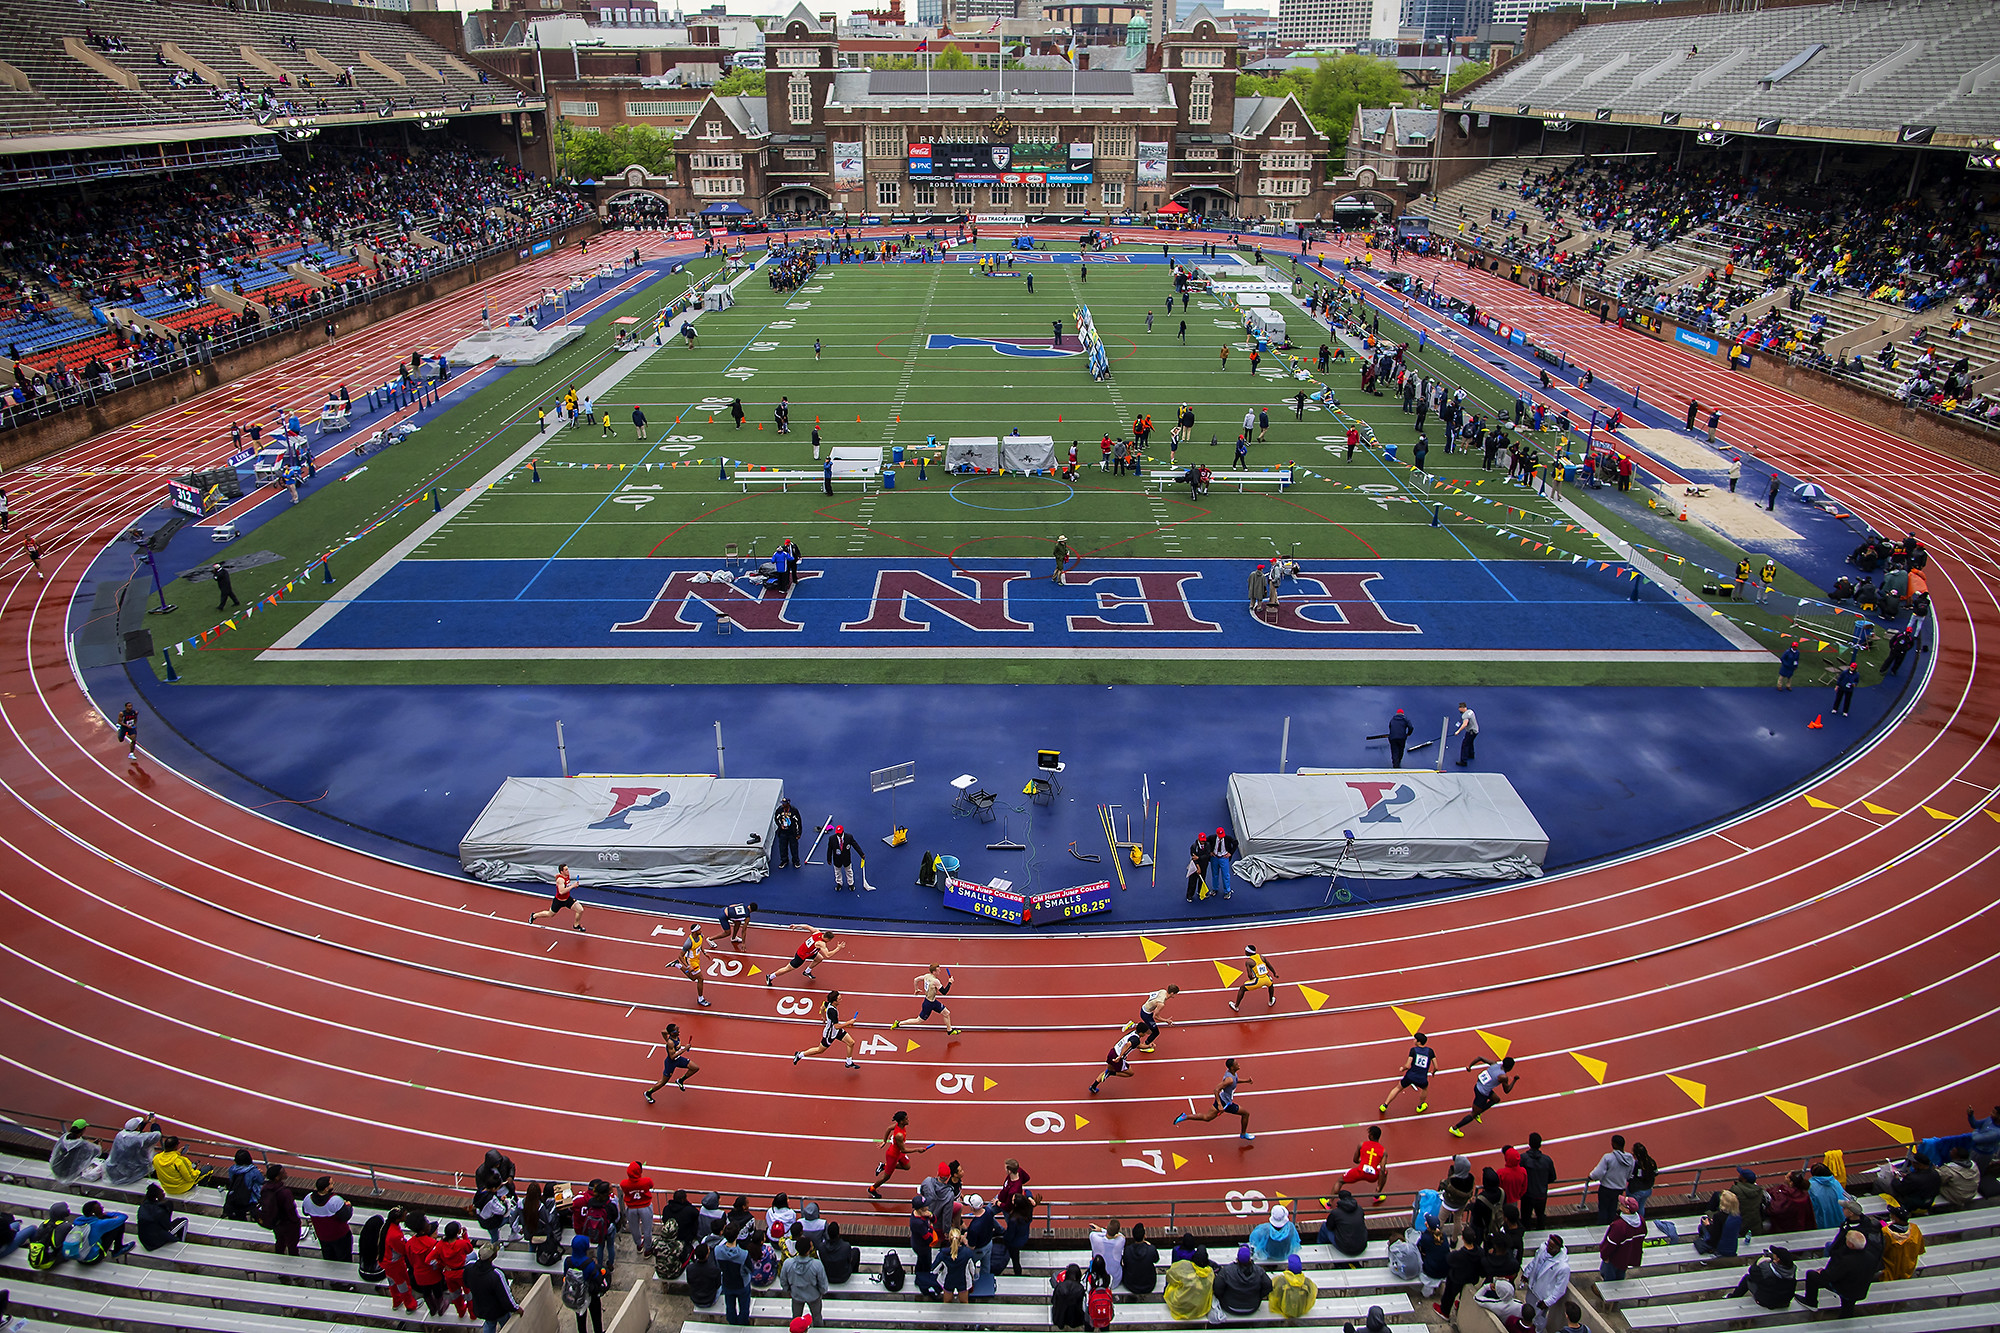 Runners race around the Franklin Field track at the 2019 Penn Relays.